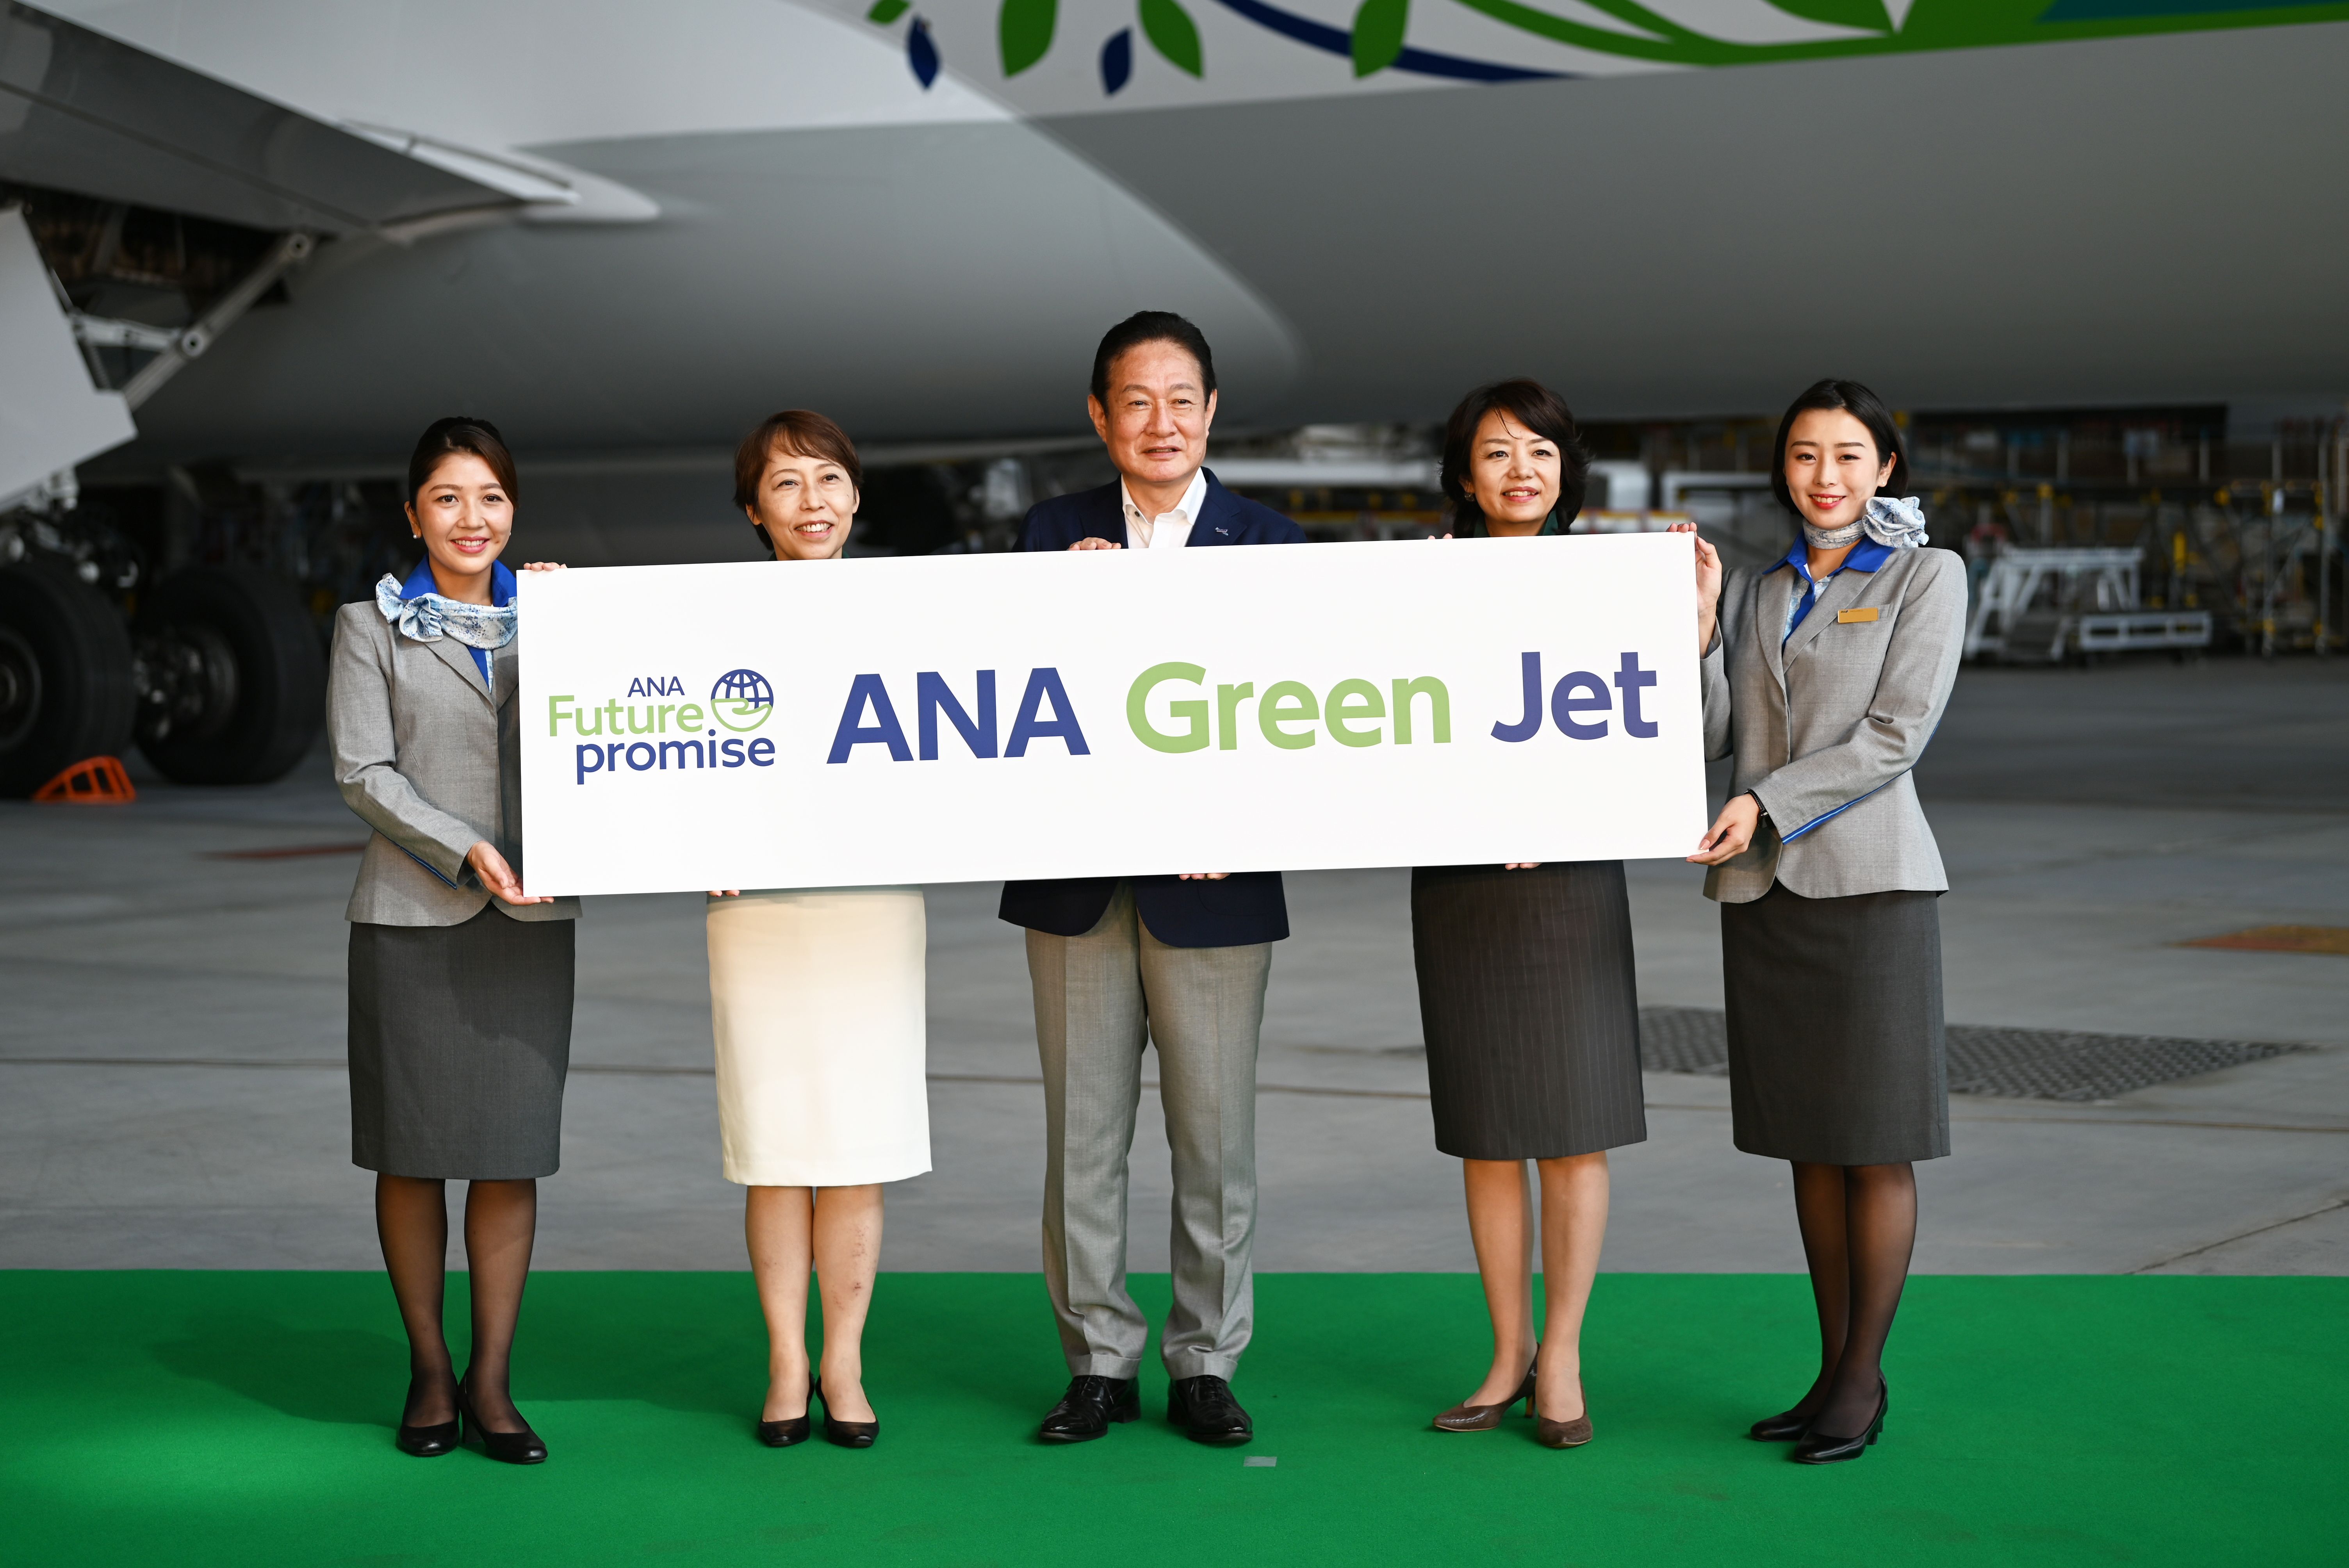 ANA staff members holding a green jet sign